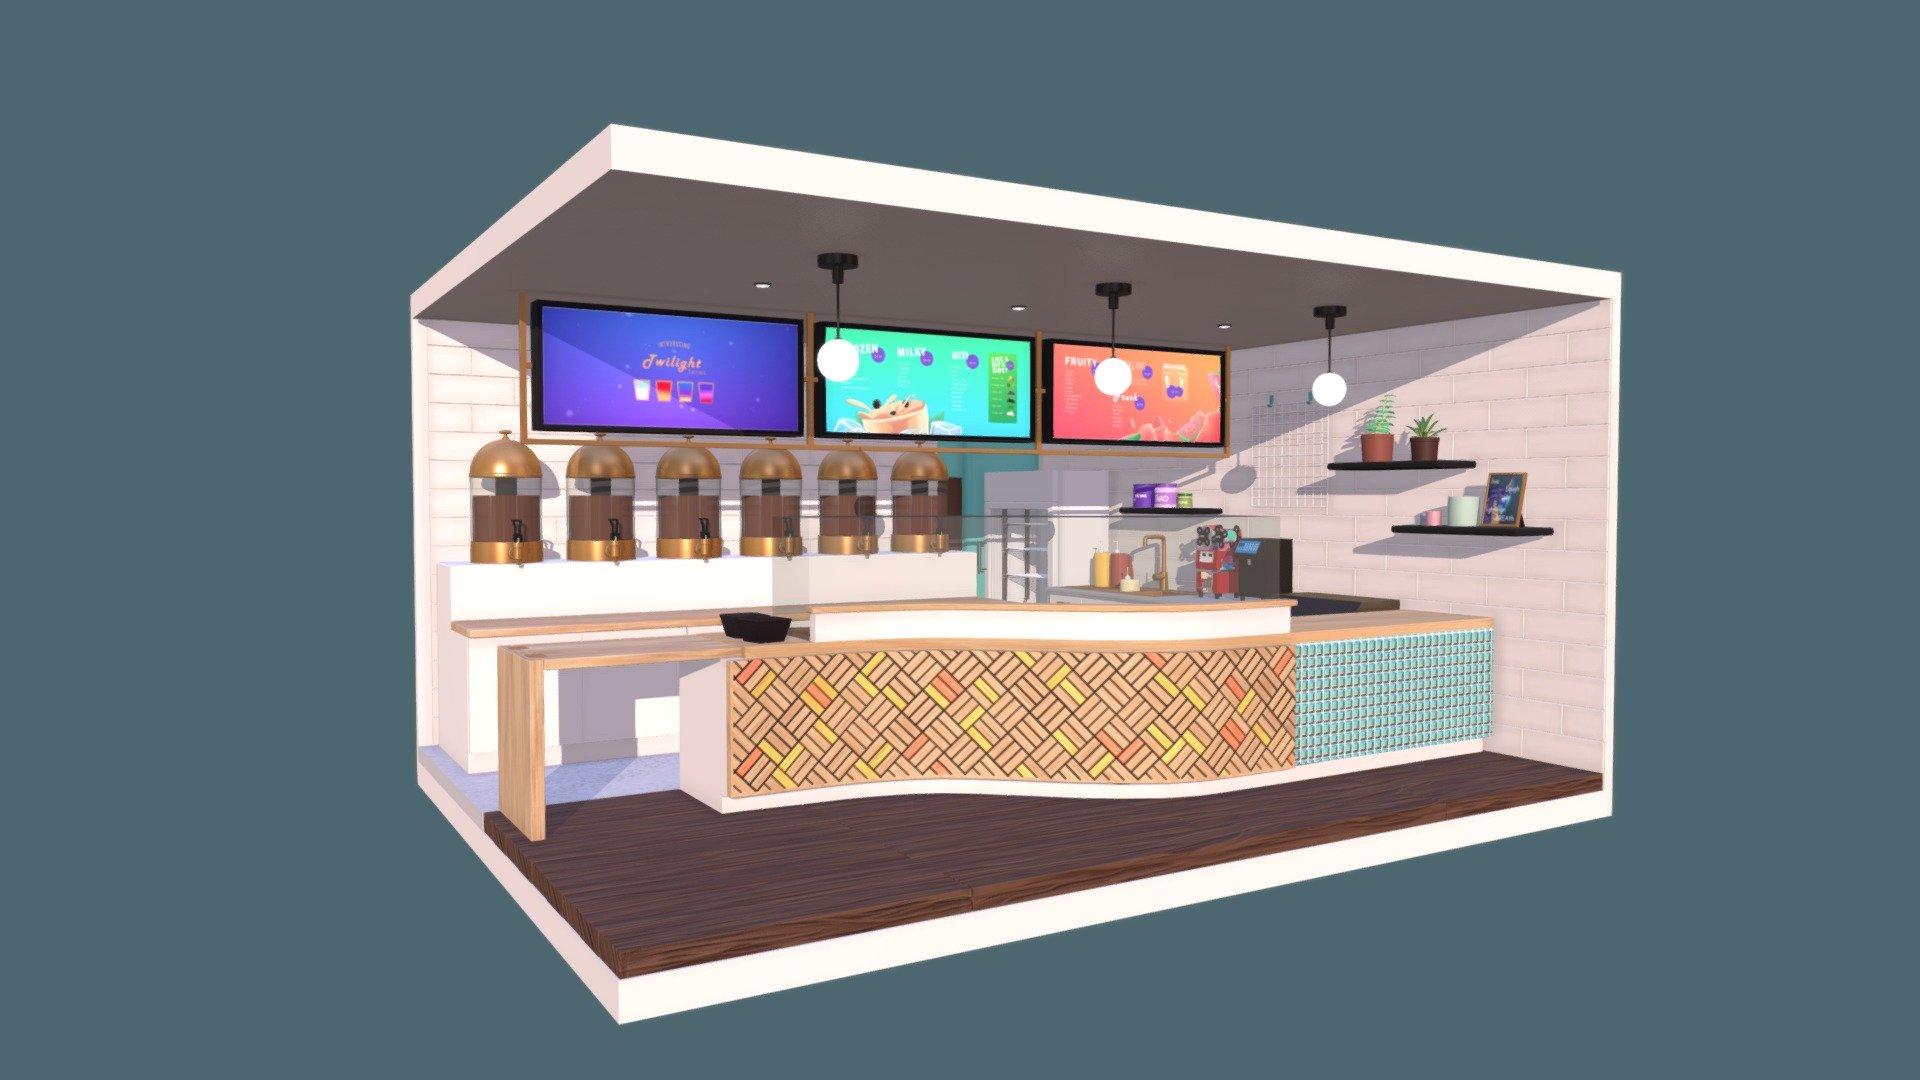 Diorama of the interior of a Chatime store modelled in Maya, and textured using Photoshop 3d model